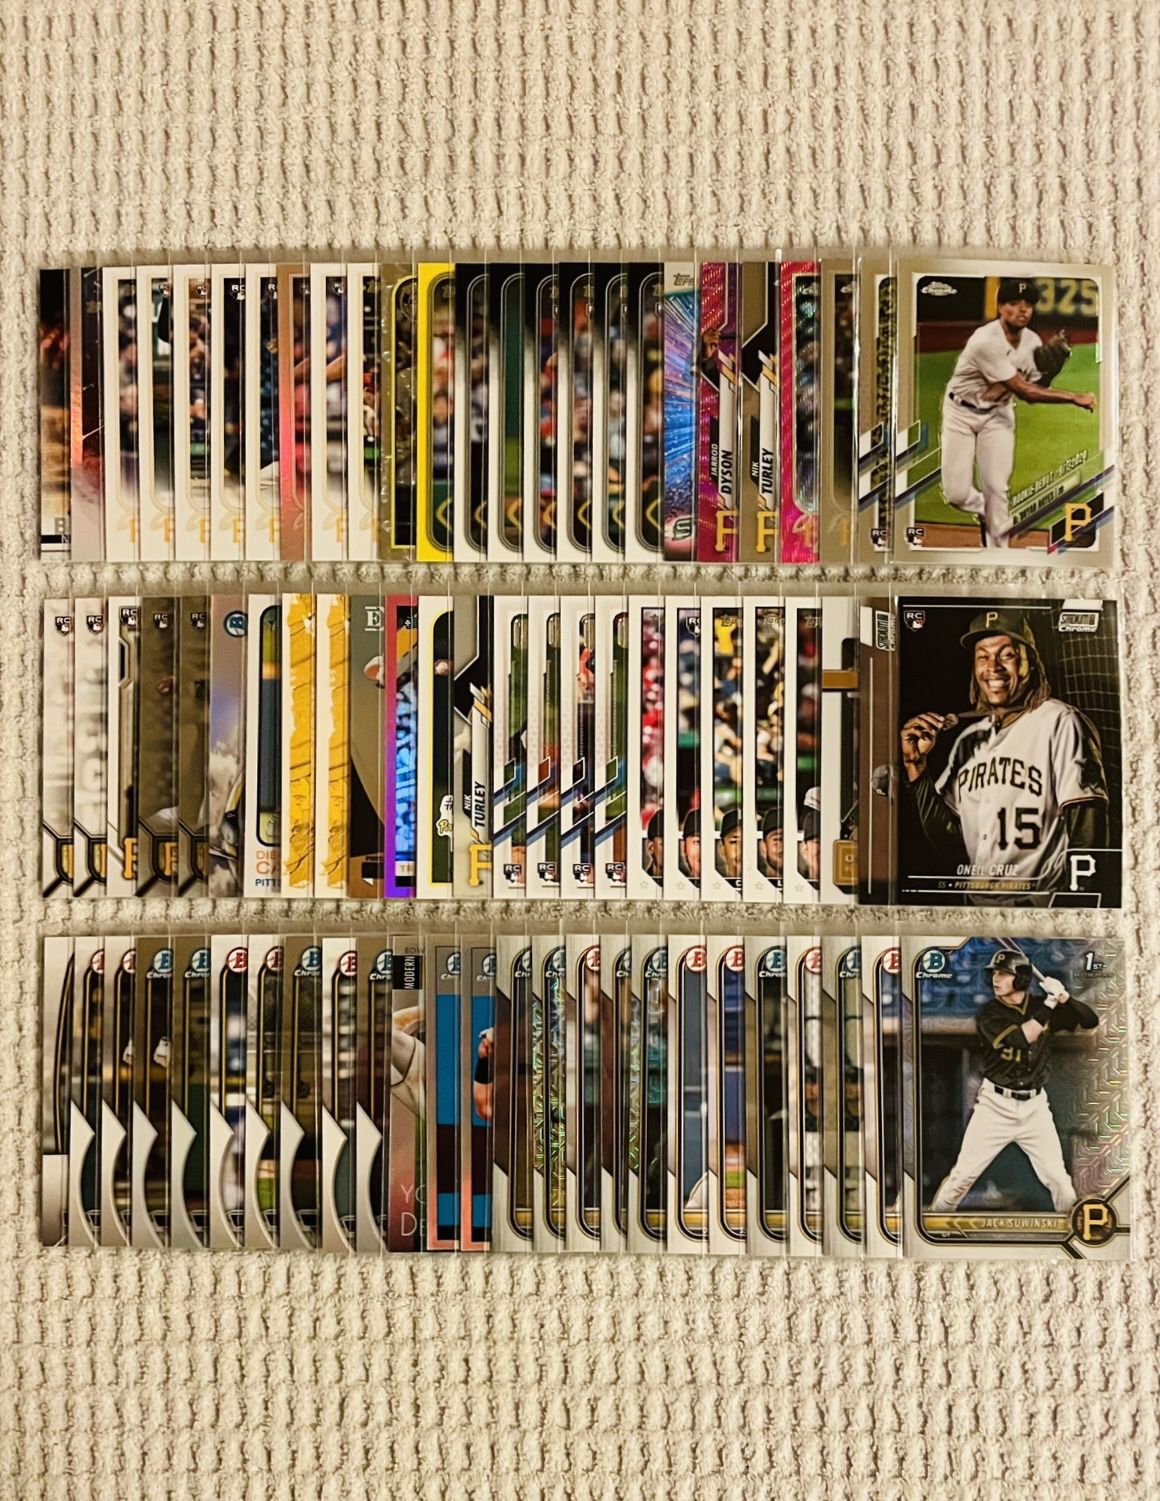 Pittsburgh Pirates 75 Card Baseball Lot! Rookies, Prospects, Refractors, Parallels, Short Prints, Variations & More!